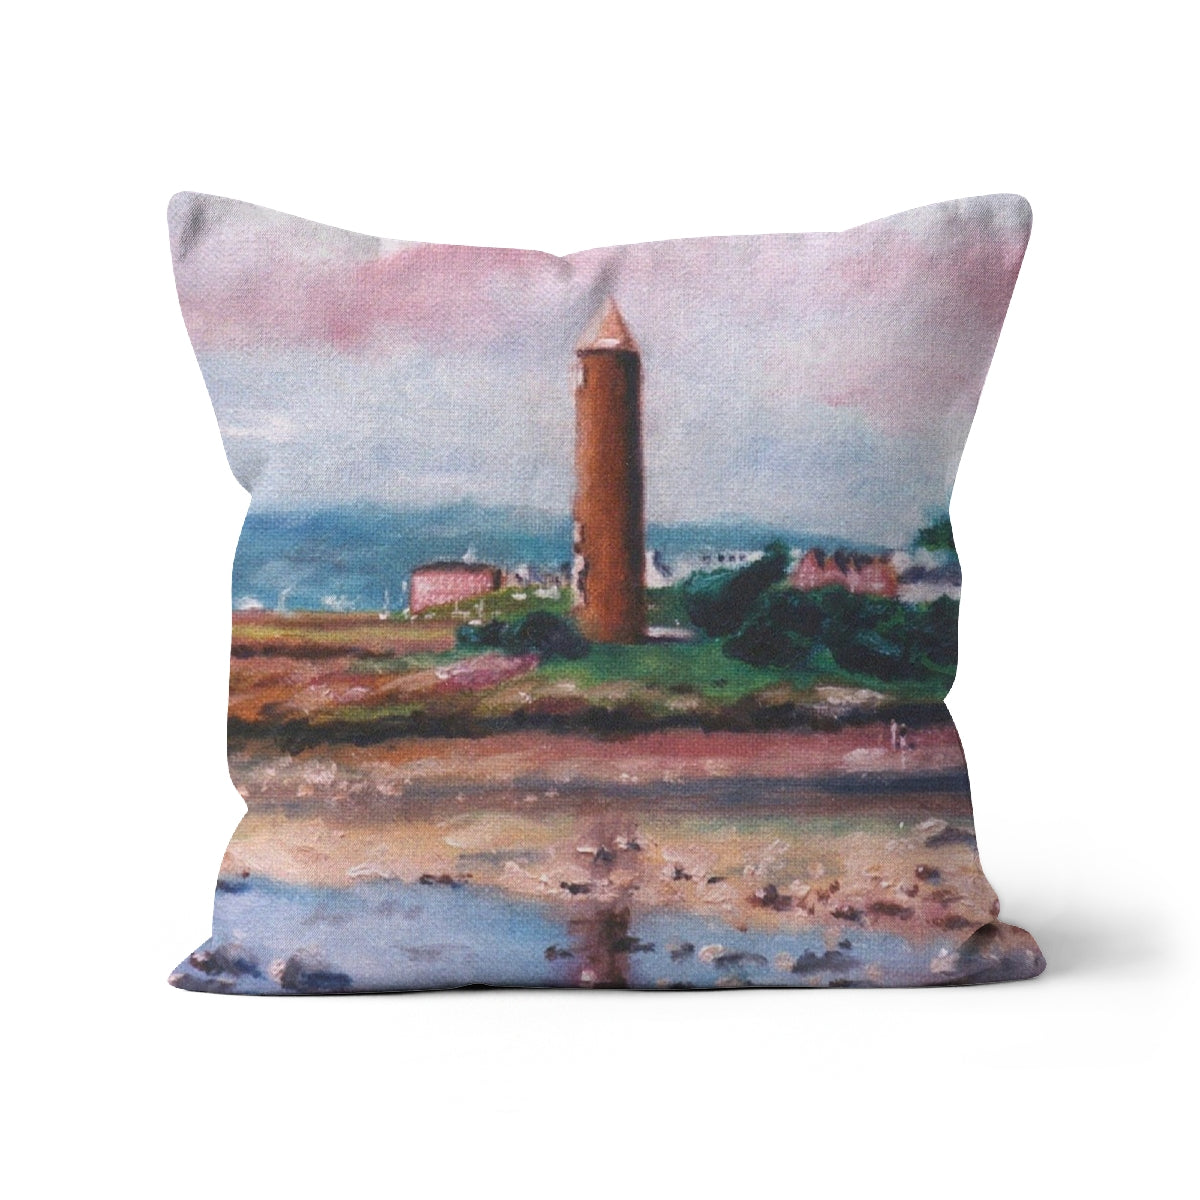 Pencil Point Largs Art Gifts Cushion-Cushions-River Clyde Art Gallery-Linen-12"x12"-Paintings, Prints, Homeware, Art Gifts From Scotland By Scottish Artist Kevin Hunter